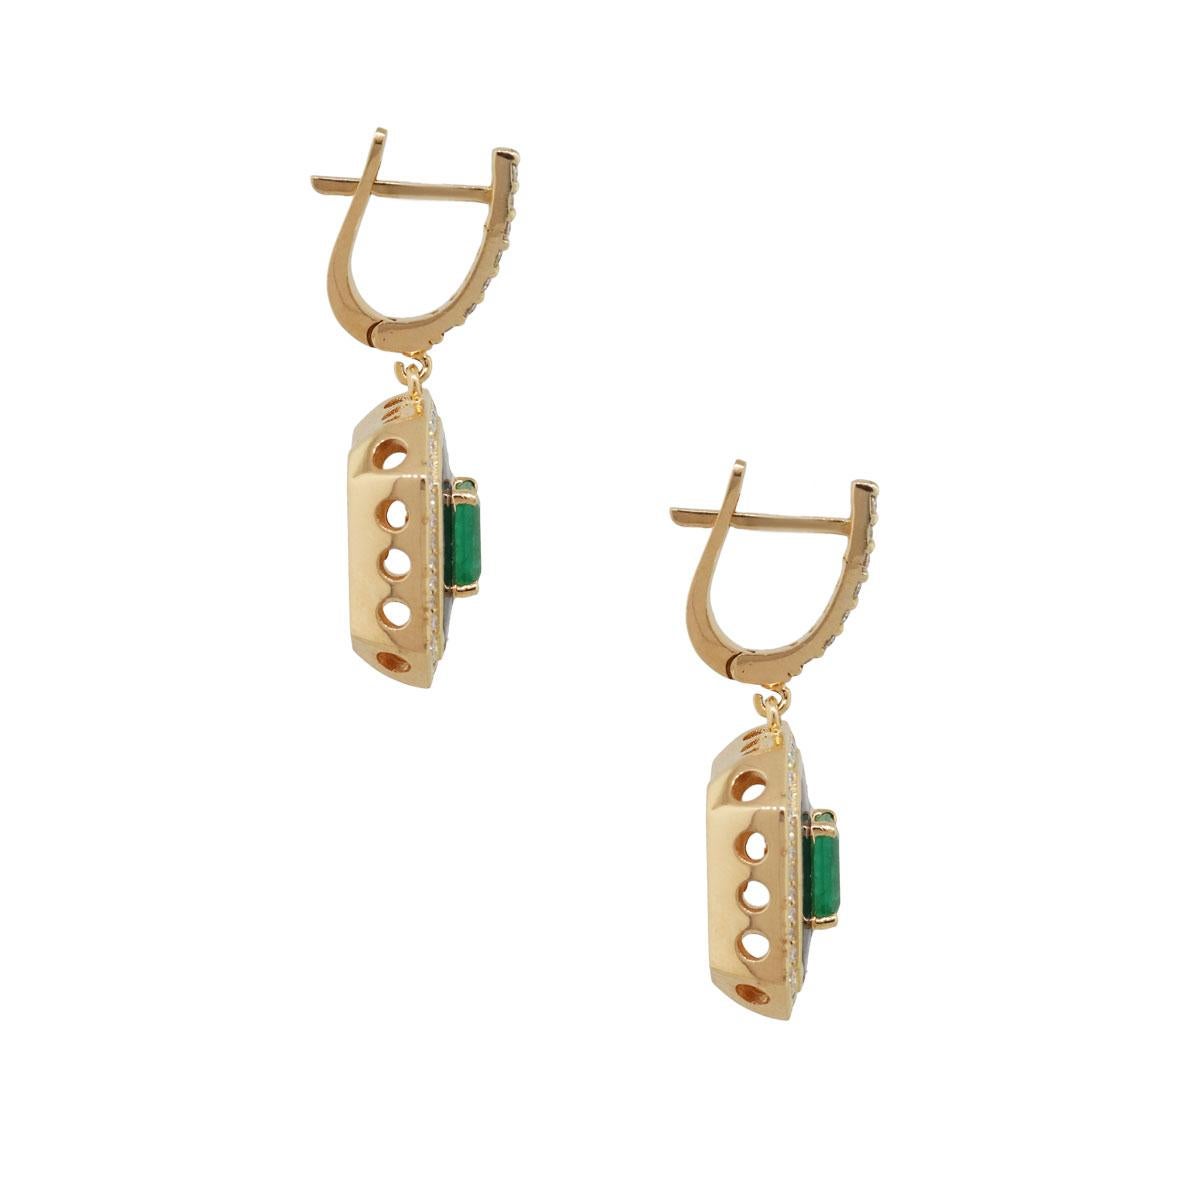 Material: 18k rose gold
Diamond Details: Approximately 0.47ctw of round brilliant diamonds. Diamonds are G/H in color and VS in clarity
Gemstone Details: Approximately 1.03ctw of emerald cut emeralds
Earring Measurements: 1.18″ x 0.29″ x